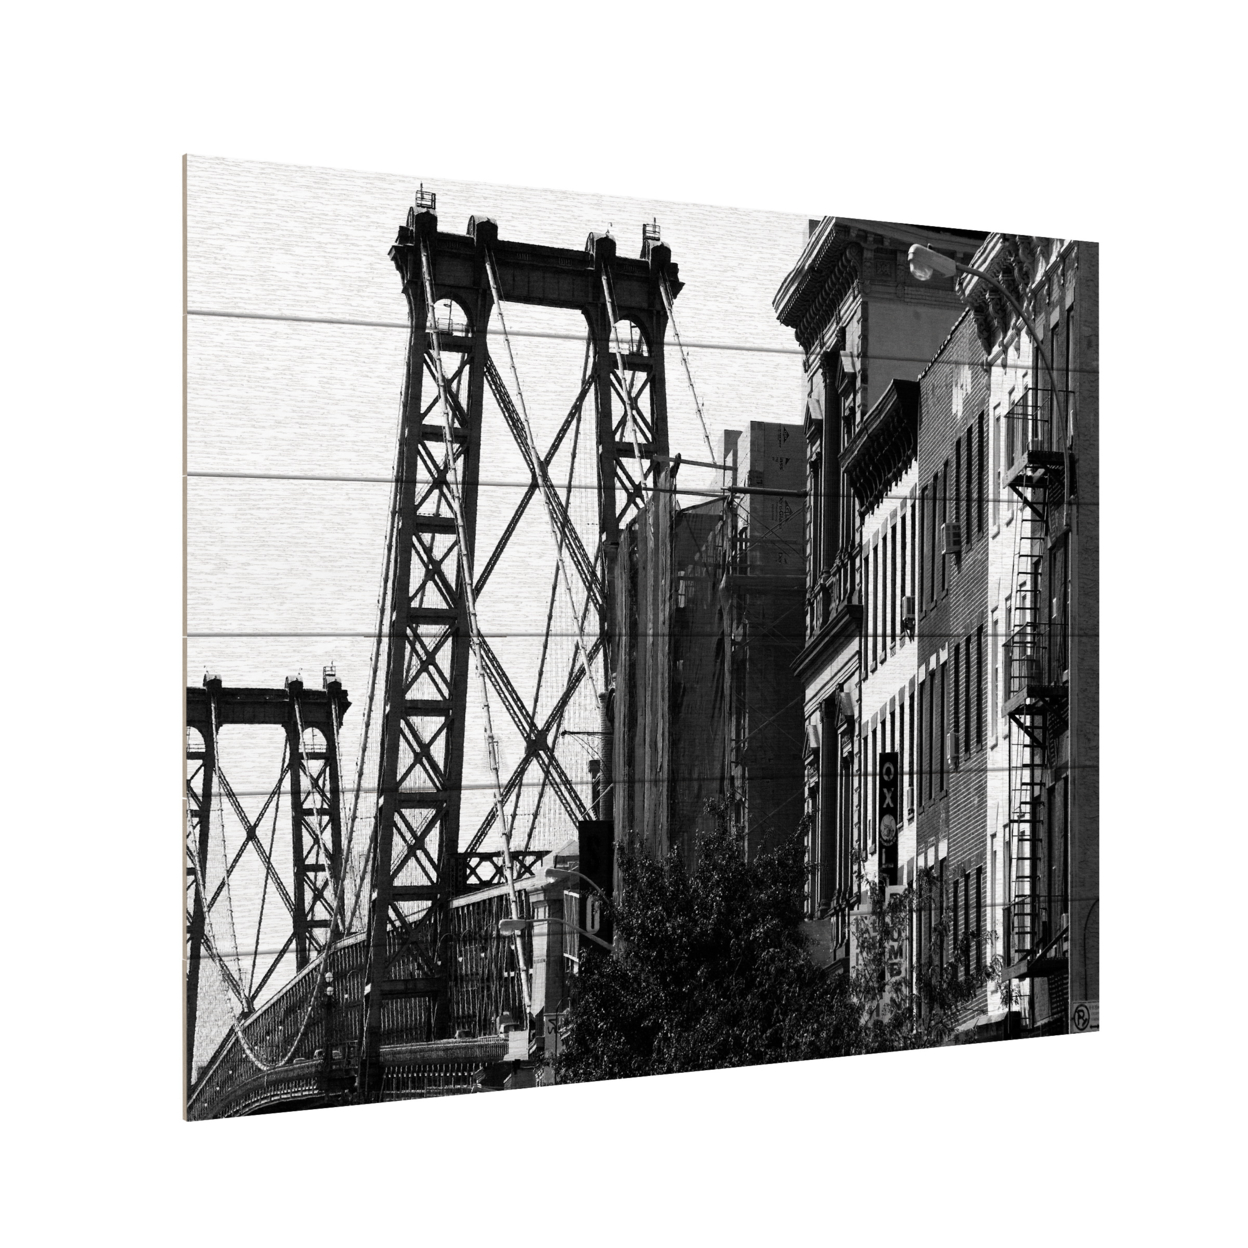 Wooden Slat Art 18 X 22 Inches Titled Williamsburg Bridge Ready To Hang Home Decor Picture